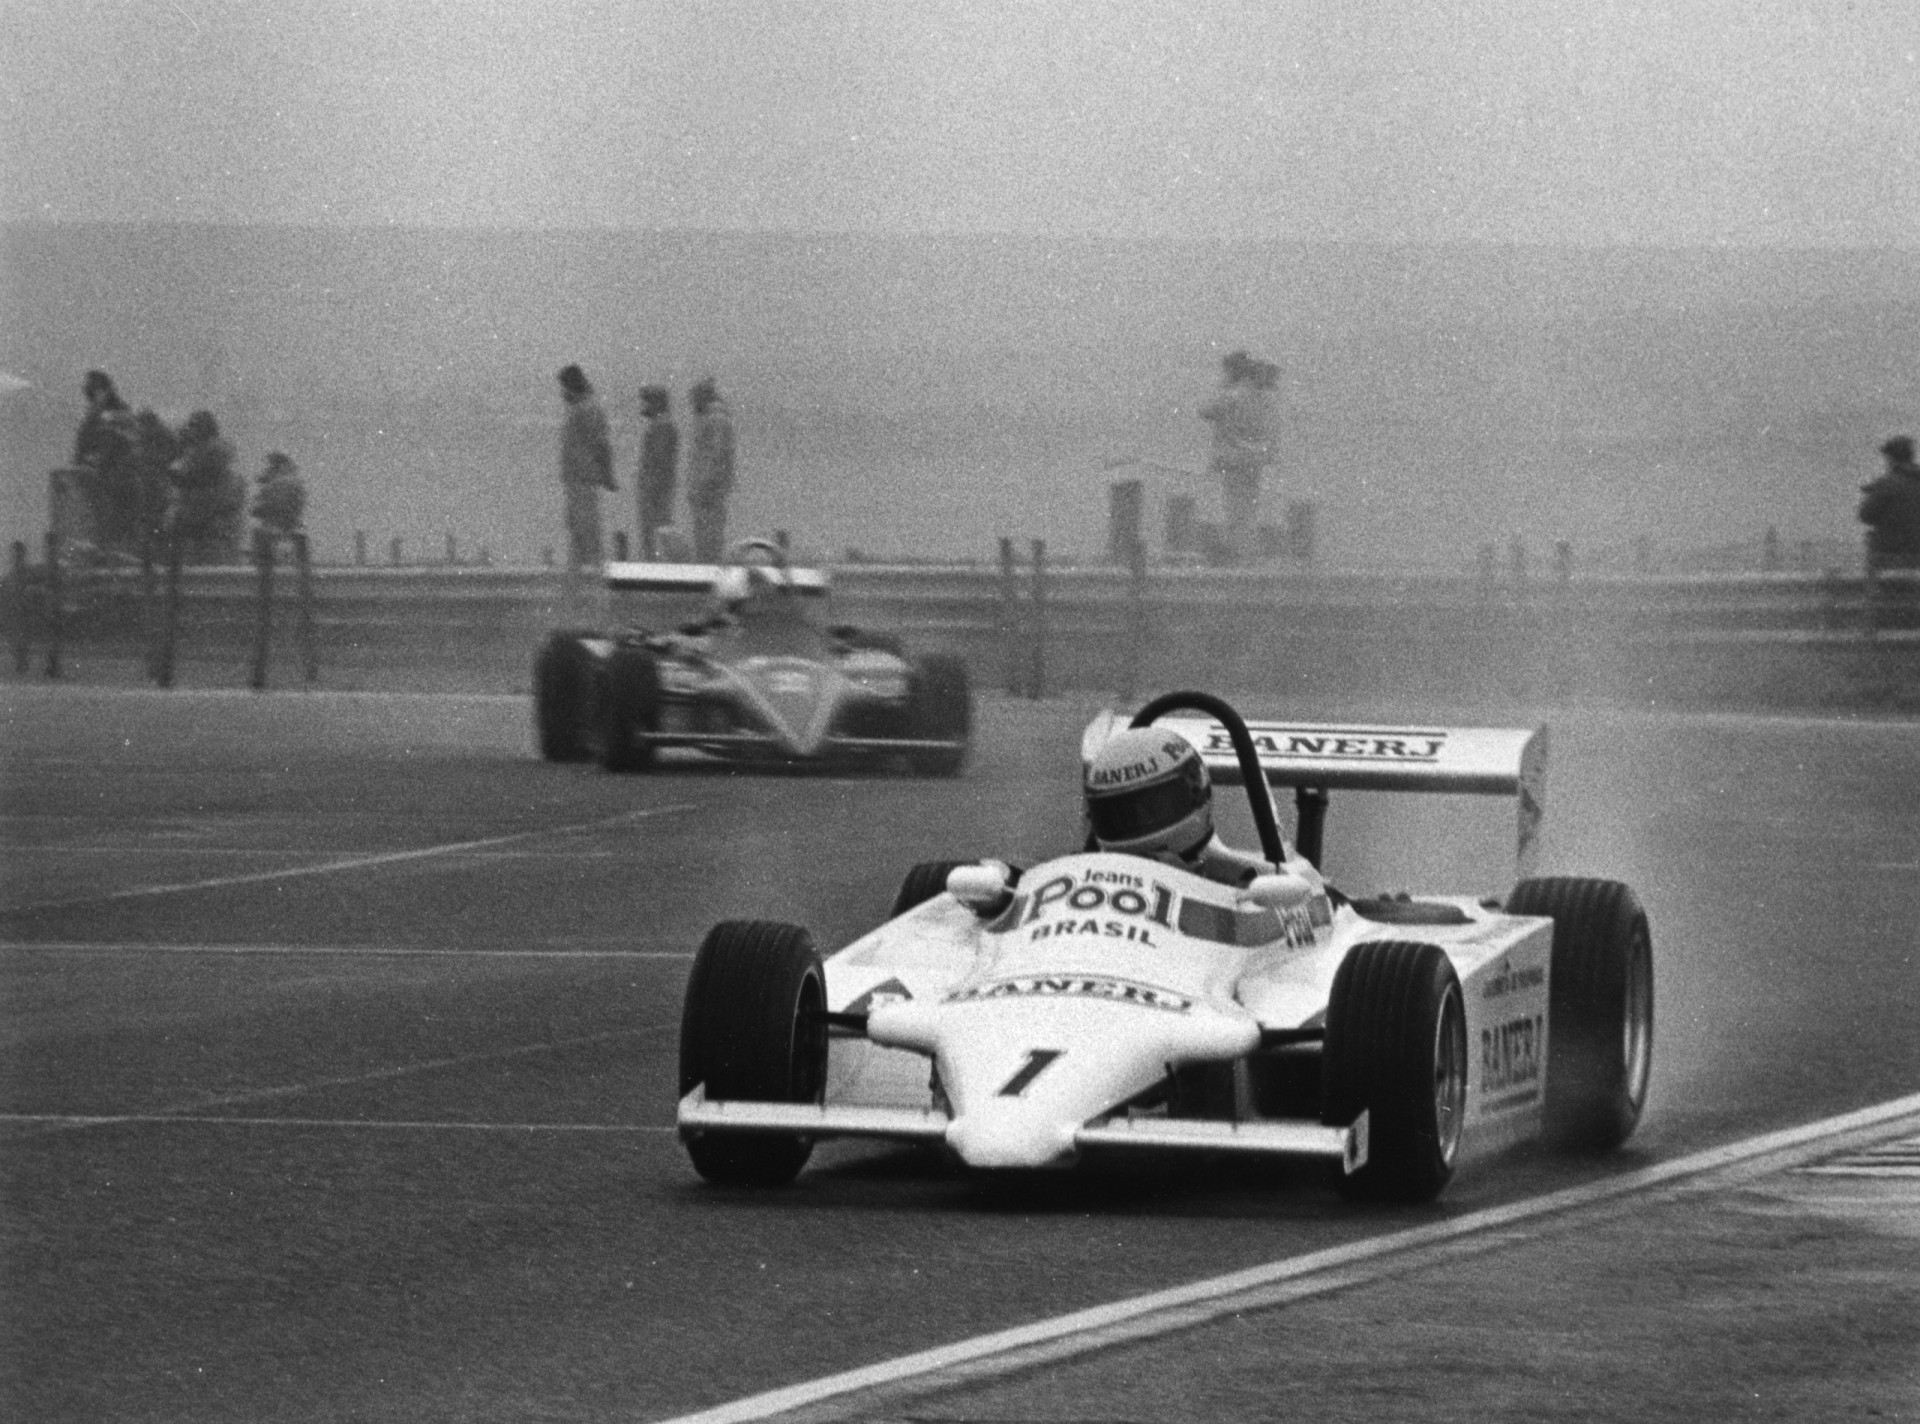 <p>In 1981, Senna moved to England to begin single-seater racing. By 1983, he was competing in Formula Three. He's pictured at the wheel of a Ralt RT3 at Thruxton on March 3, 1983.</p><p><a href="https://www.msn.com/en-us/community/channel/vid-7xx8mnucu55yw63we9va2gwr7uihbxwc68fxqp25x6tg4ftibpra?cvid=94631541bc0f4f89bfd59158d696ad7e">Follow us and access great exclusive content every day</a></p>